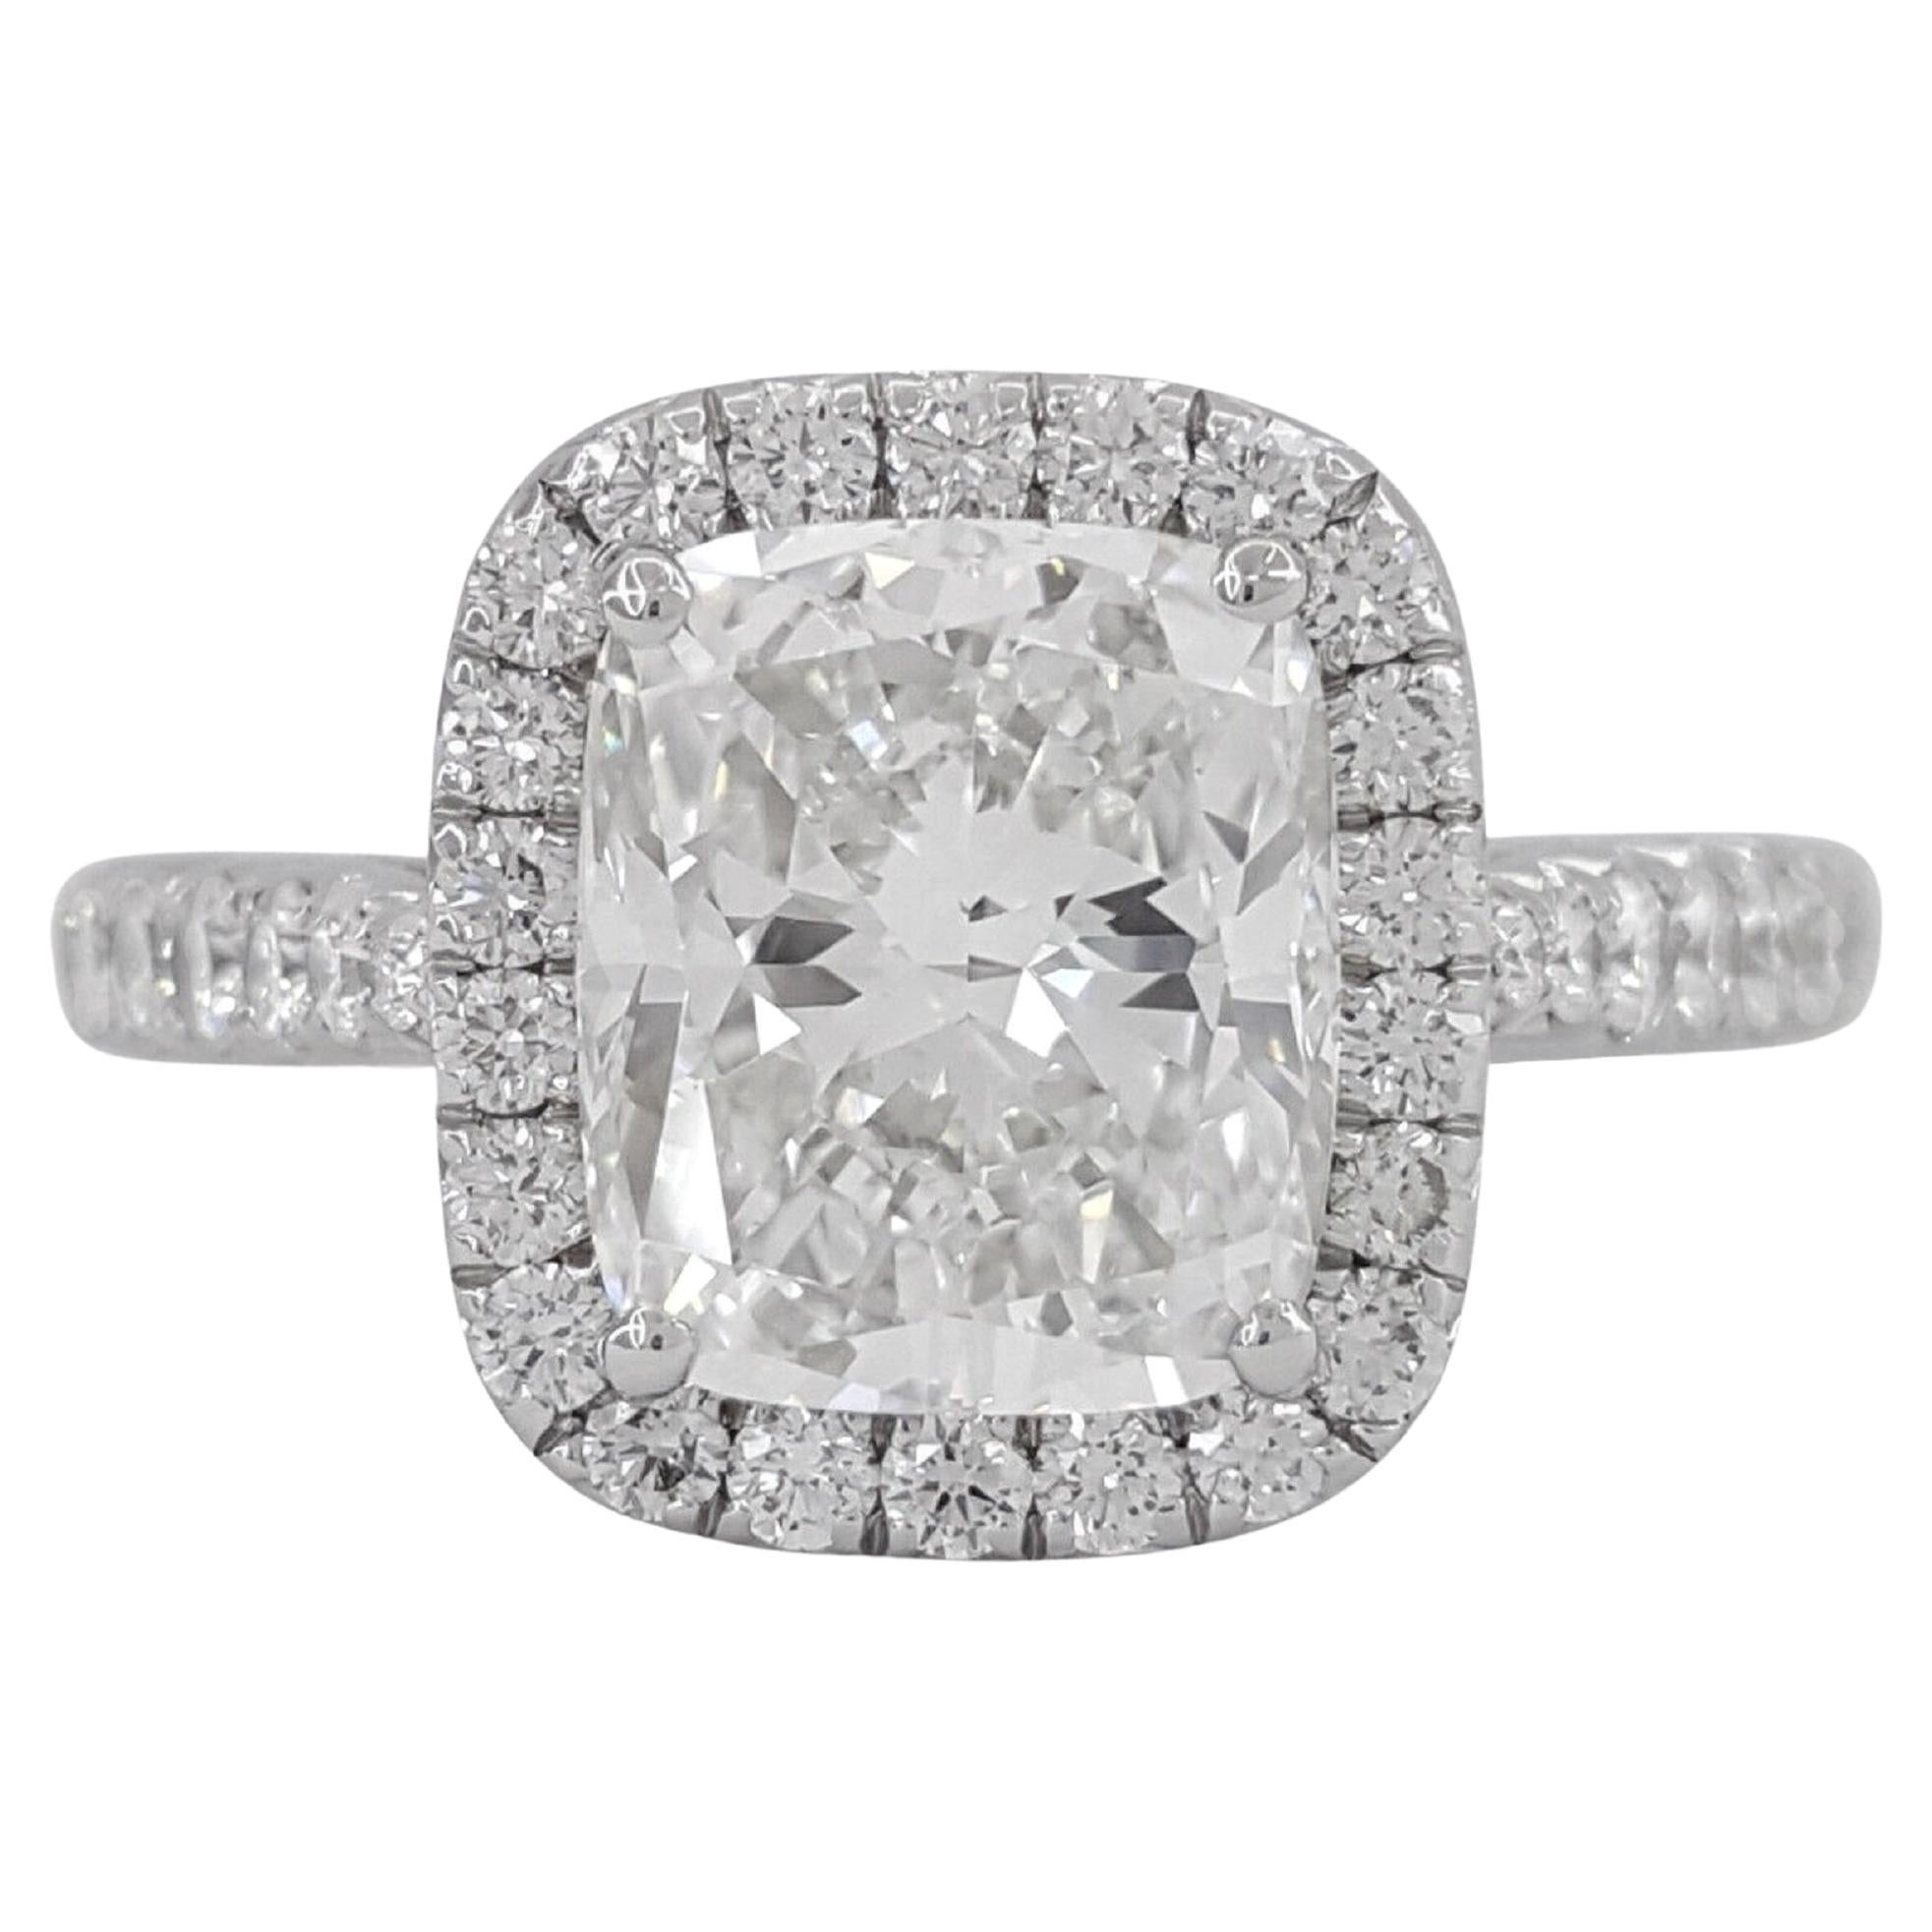 Celebrate your love with this extraordinary engagement ring, an eternal symbol of commitment and affection. At the heart of this masterpiece is a magnificent GIA certified 2-carat cushion-cut diamond, carefully chosen for its brilliance and purity.